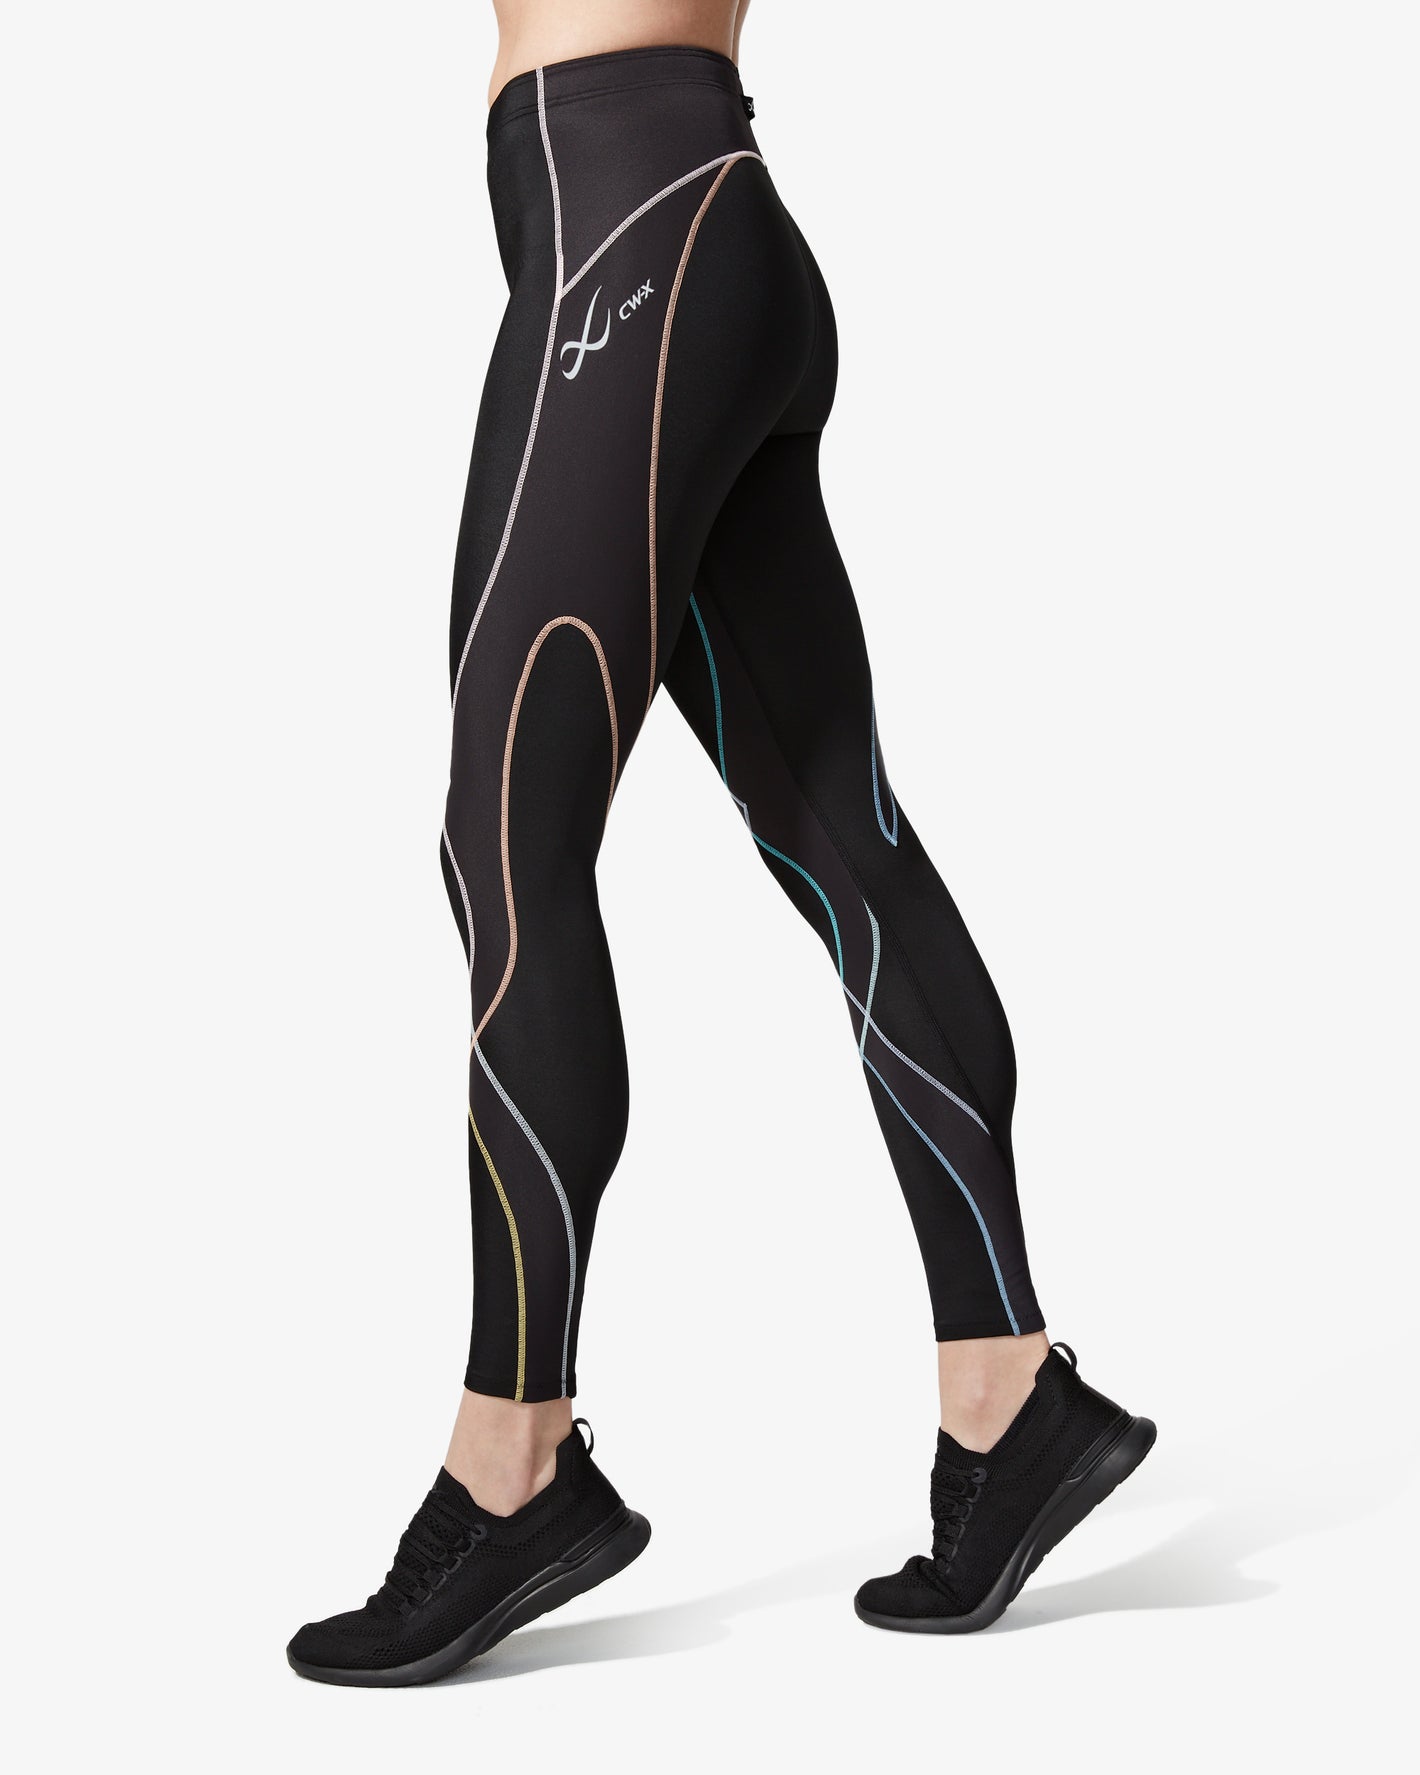 Stabilyx Joint Support 3/4 Compression Tight - Women's Forest Night